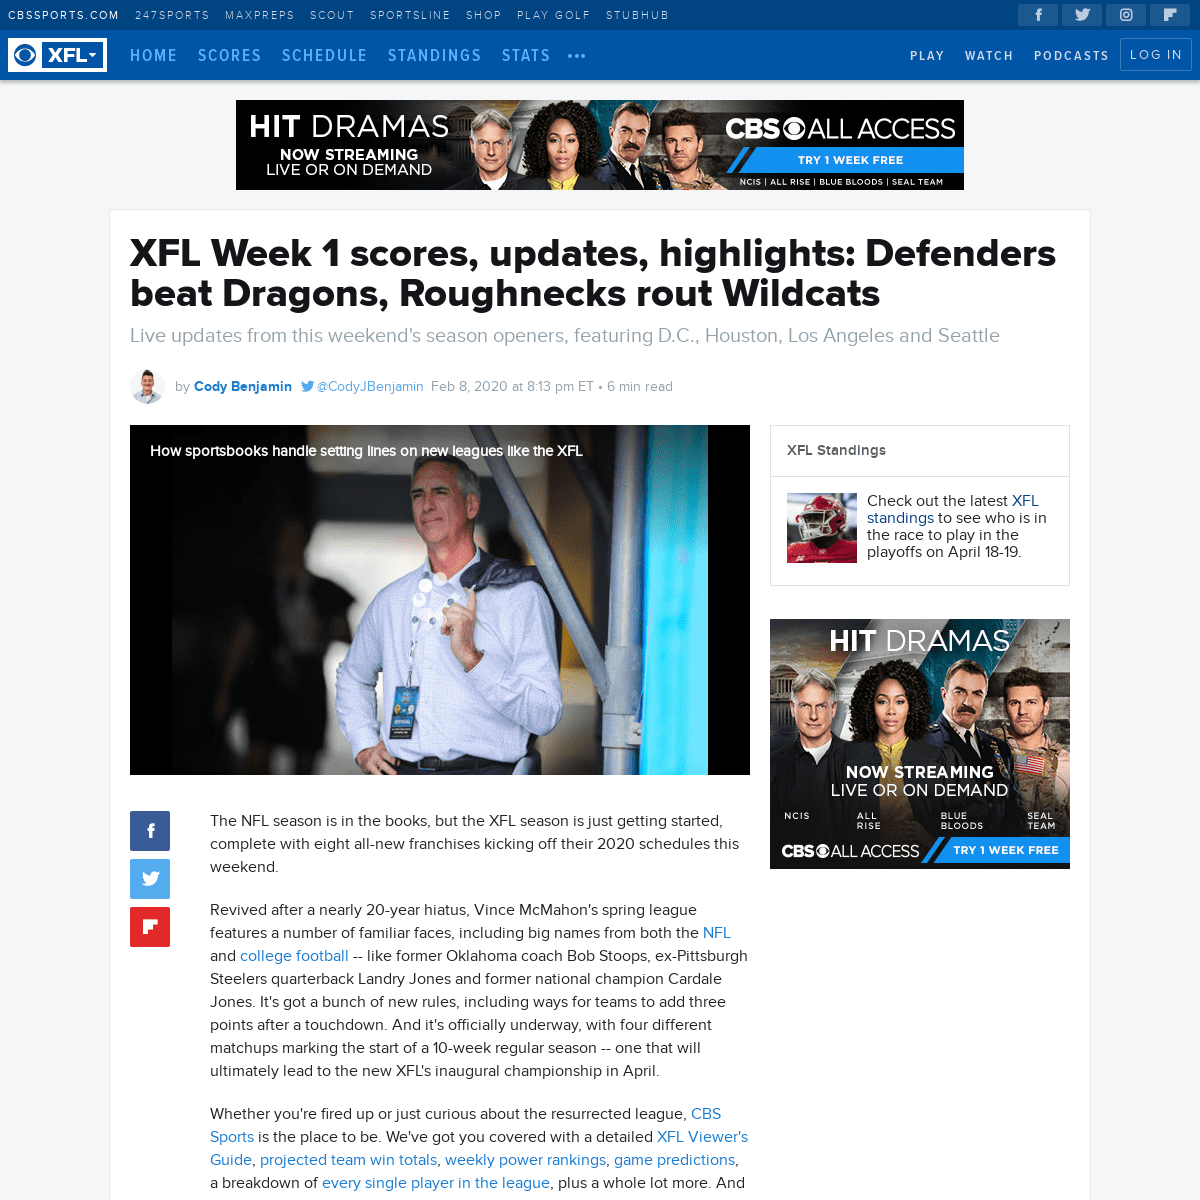 A complete backup of www.cbssports.com/xfl/news/xfl-week-1-scores-updates-highlights-defenders-beat-dragons-roughnecks-rout-wild